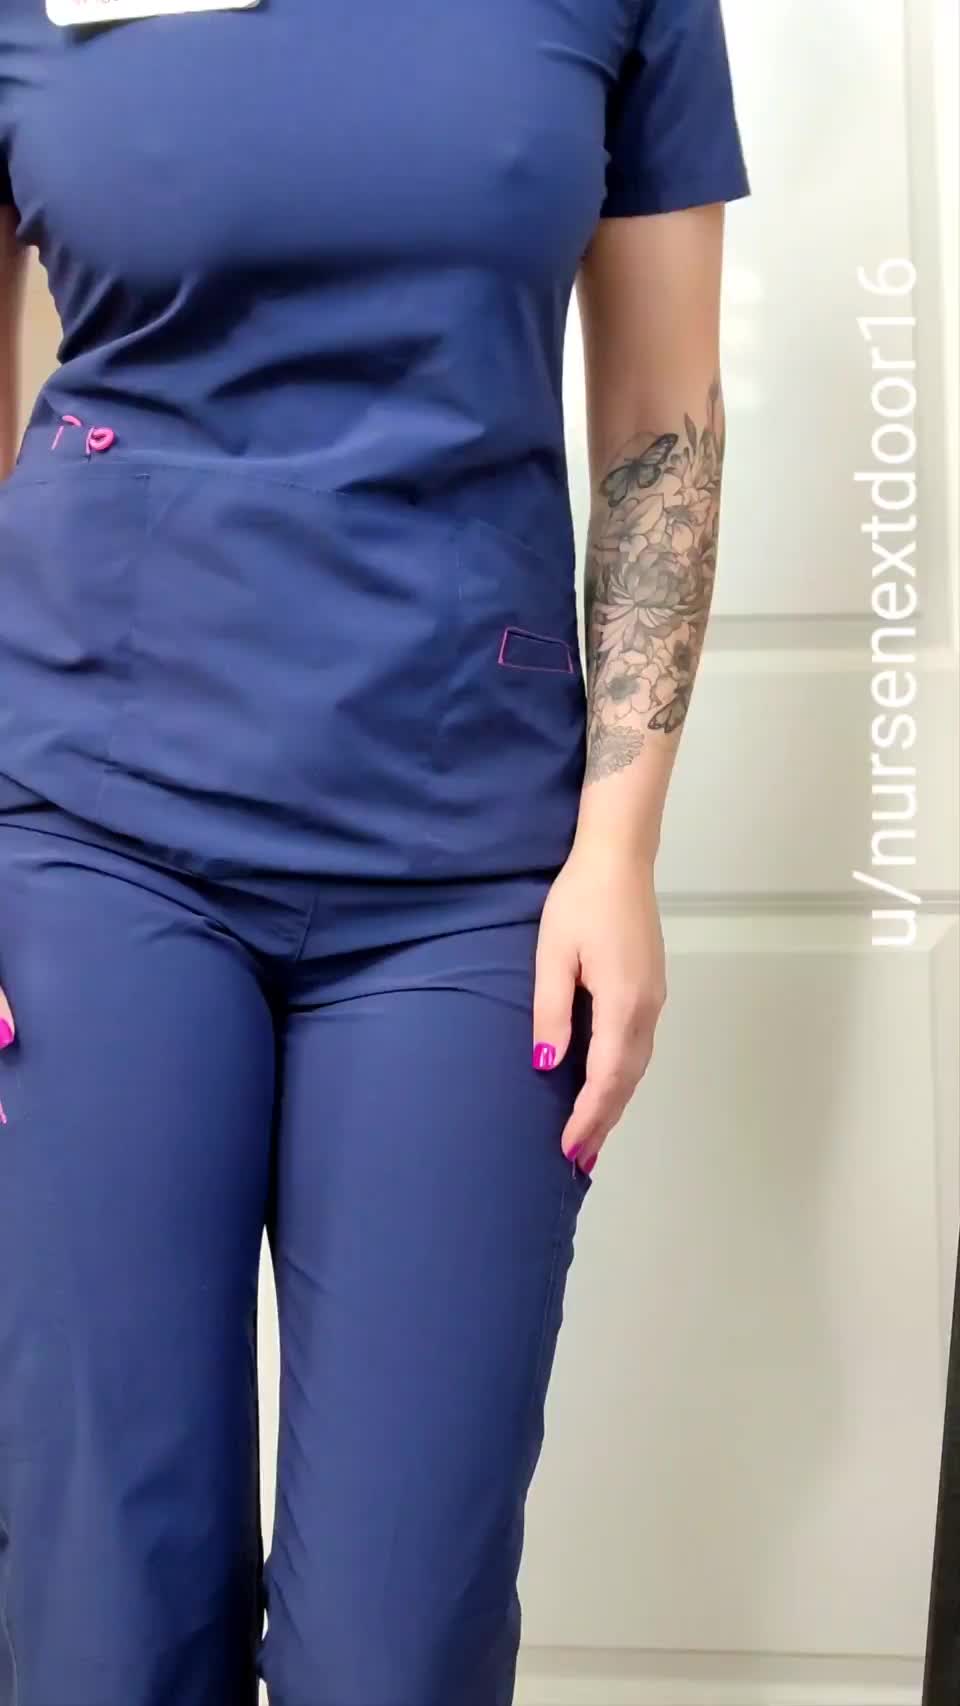 I love how this certain pair of scrubs hug my curves : video clip